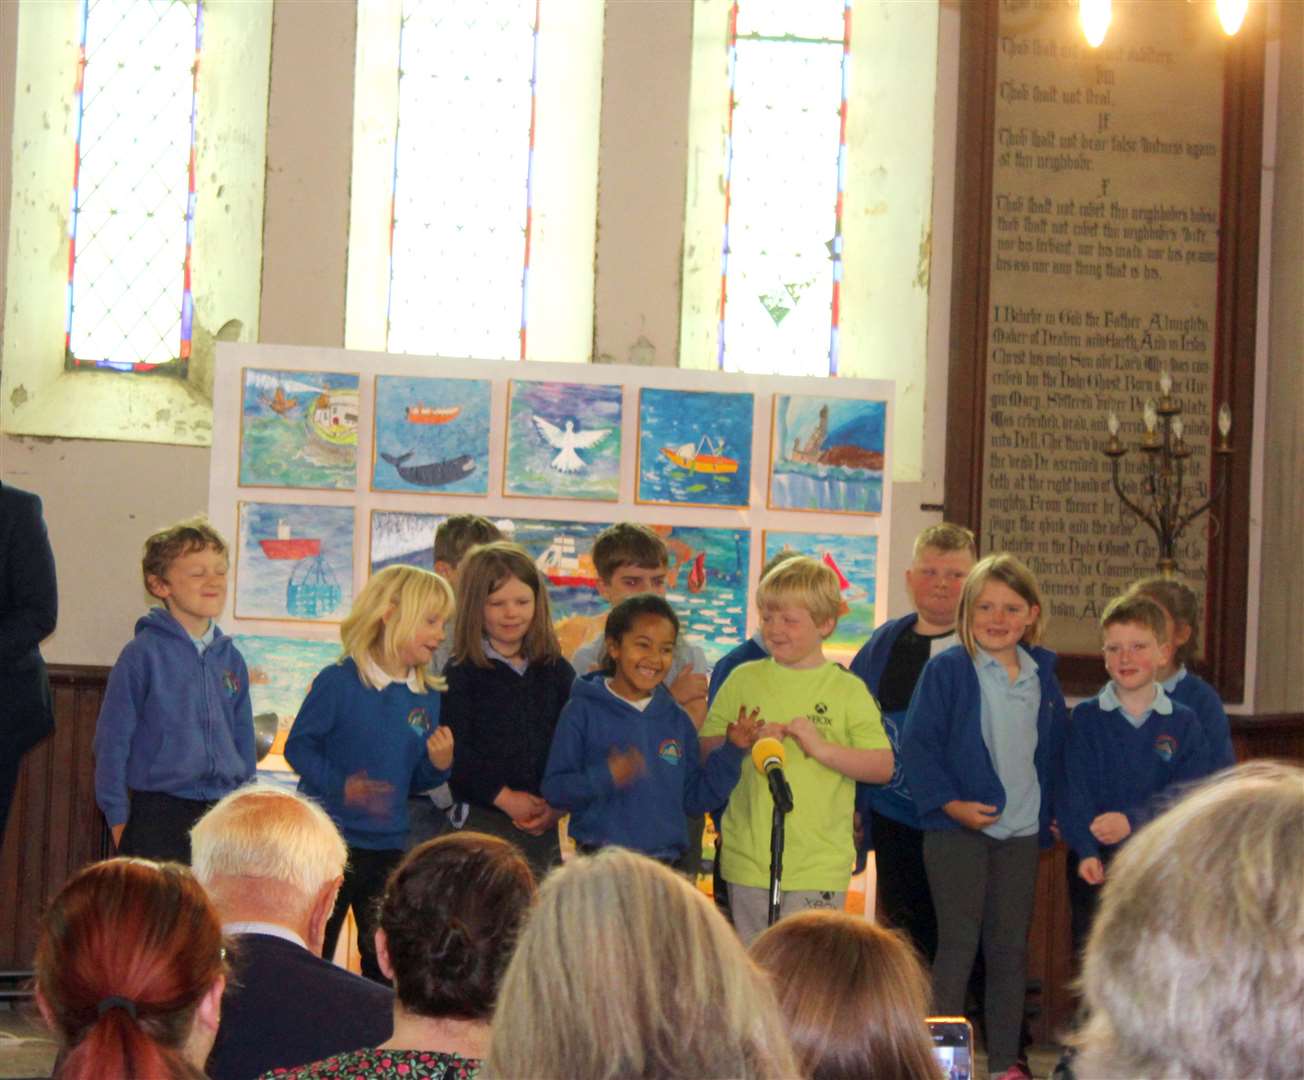 Lochinver Primary School works well with the wider community - pupils are seen here singing at the unveiling of artwork at Assynt and Stoer parish church. Photo: Niall Harkiss